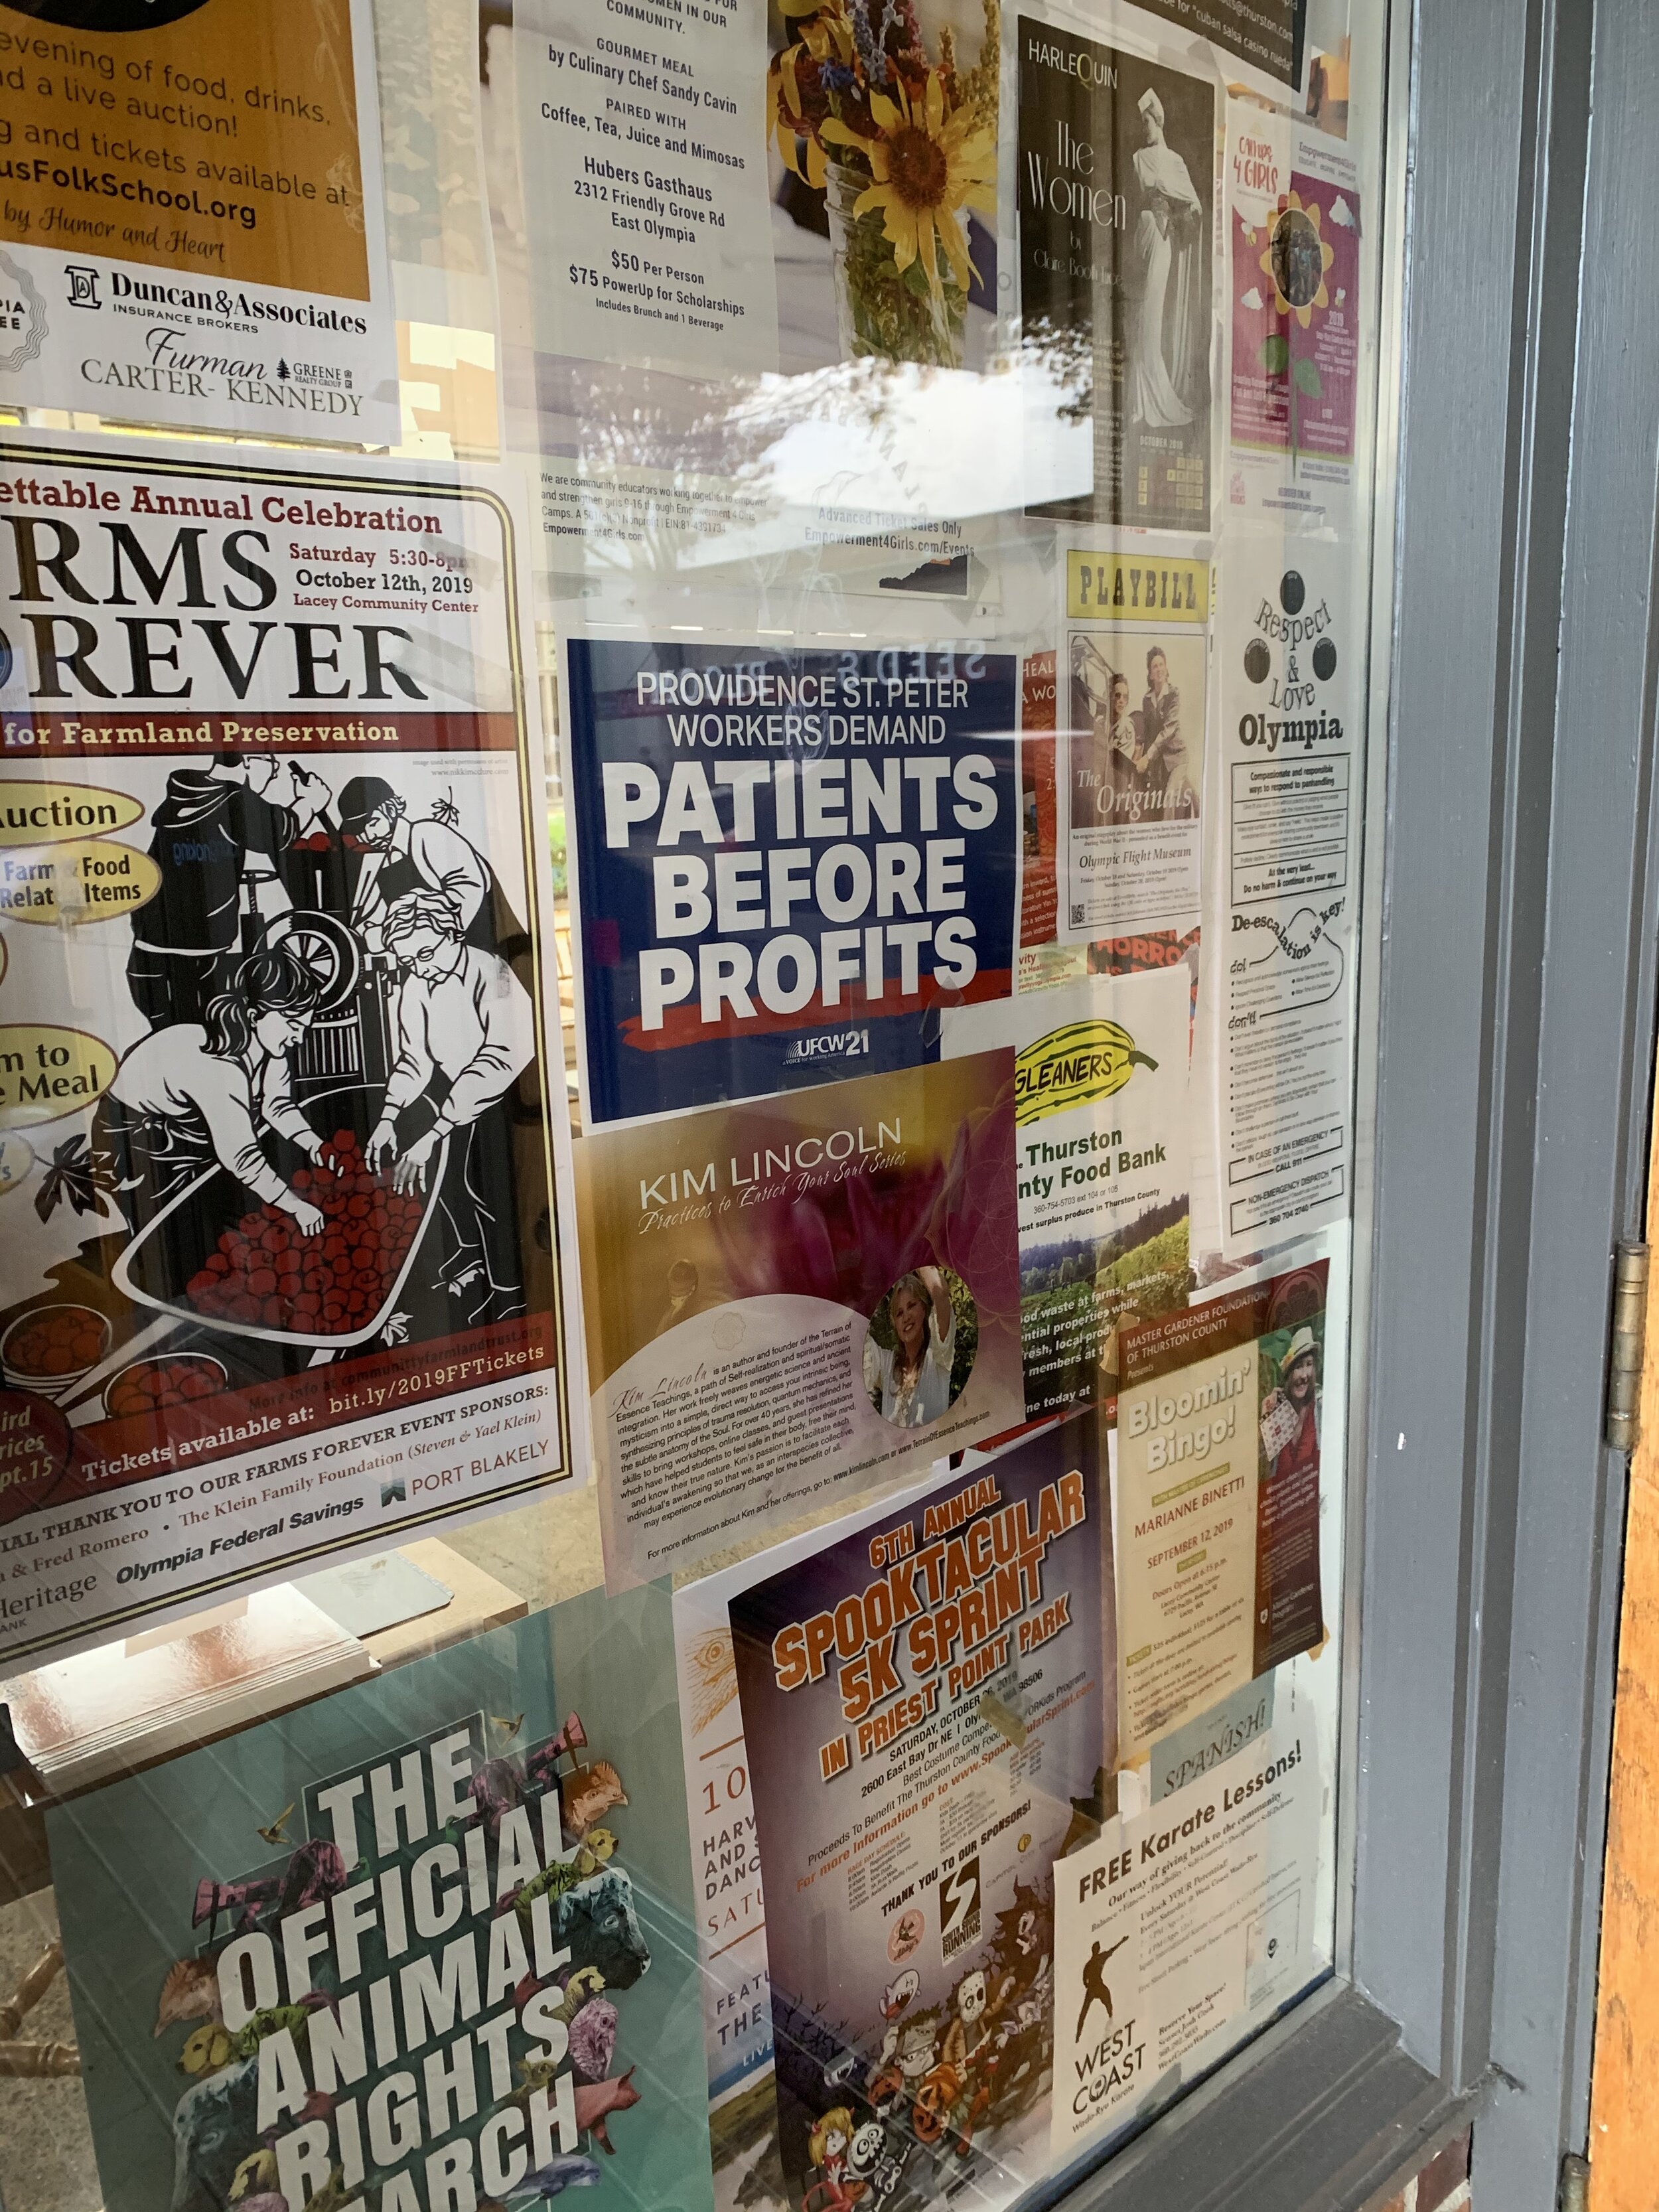 Providence - Patients Before Profits (Sign in Business).jpg